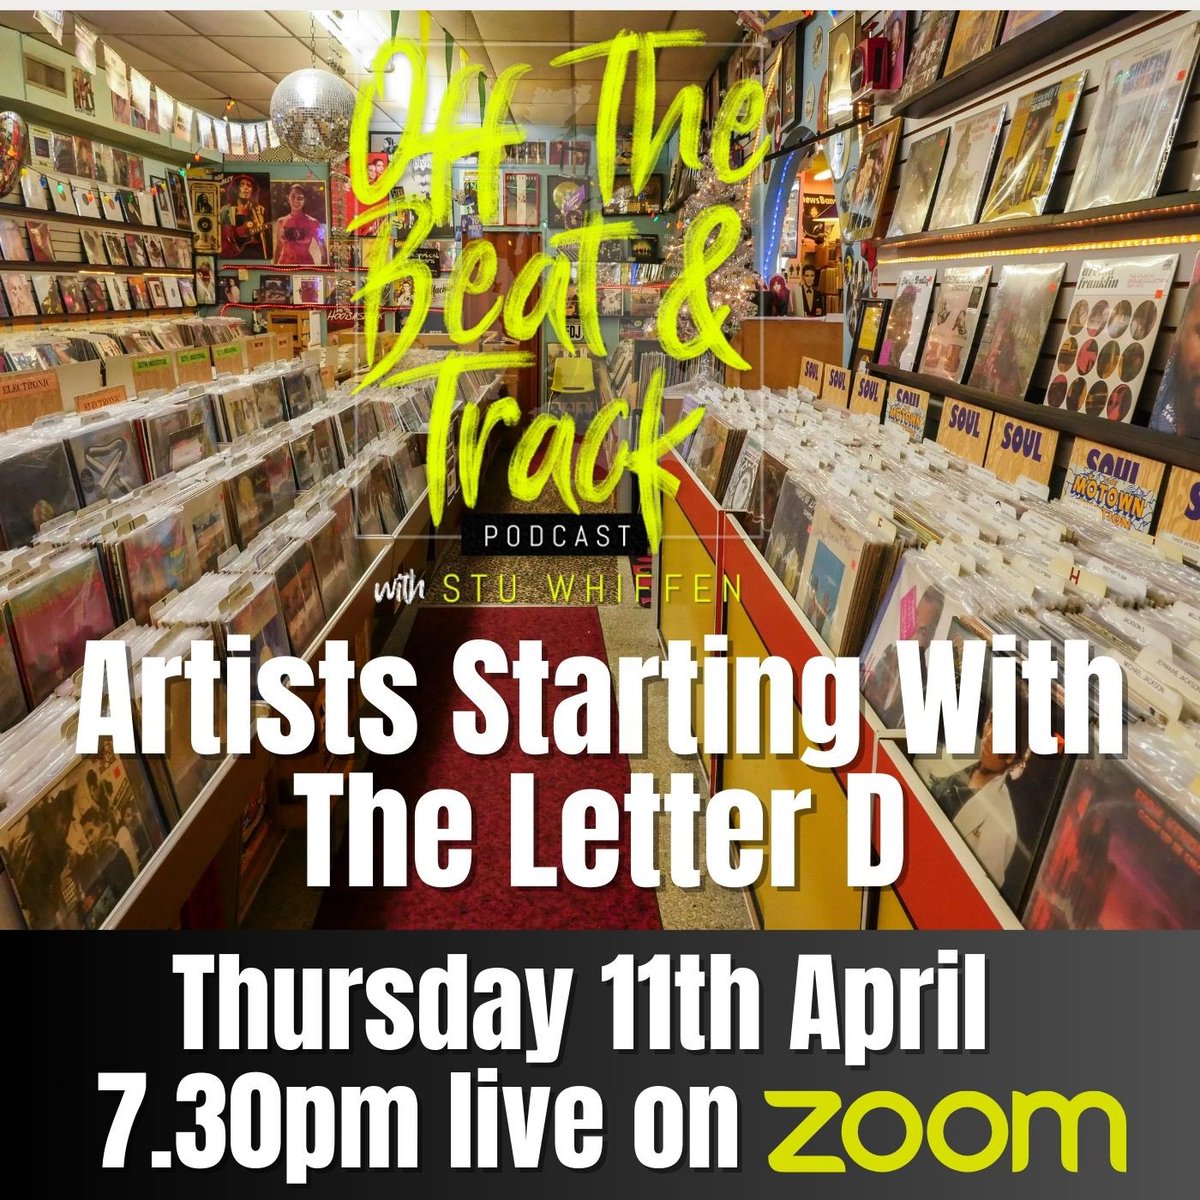 I would love to see you pop up on the zoom live show next Thursday , we will be talking about some great artists beginning with the letter D. Tickets are £1 and are available at Patreon.com/offthebeatandt…